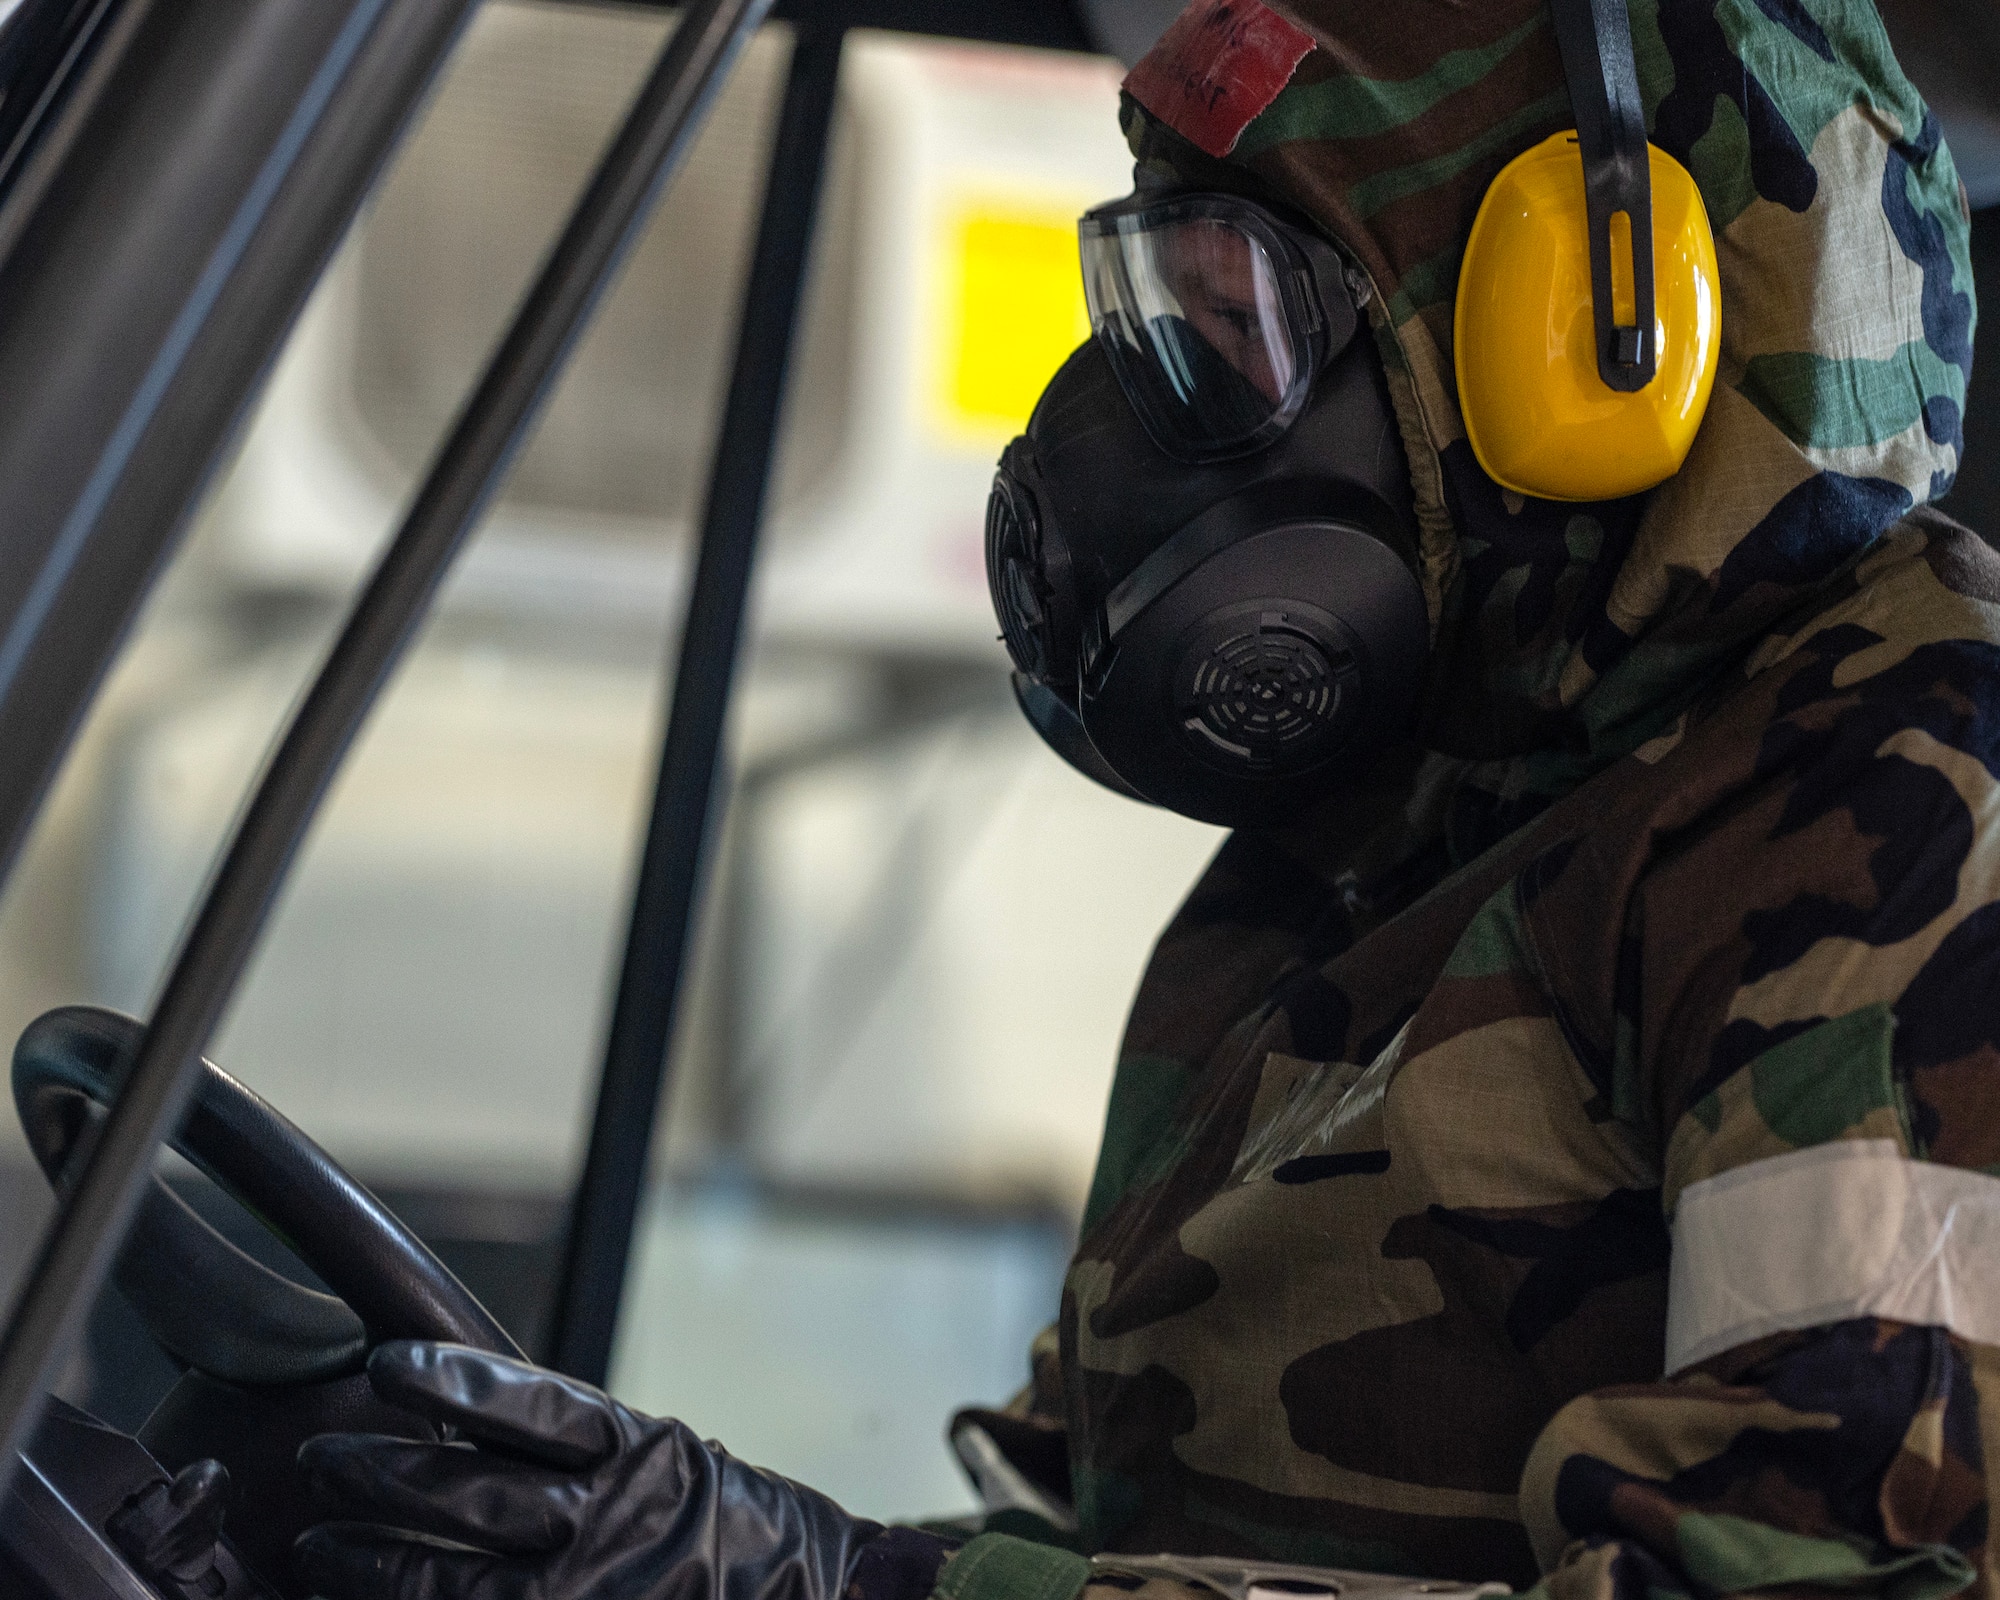 U.S. Air Force Airman from the 133rd Air Transportation Function loaded and secured cargo onto a pallet in their Mission-Oriented Protective Posture (MOPP) gear in St. Paul, Minn., April 5, 2024.